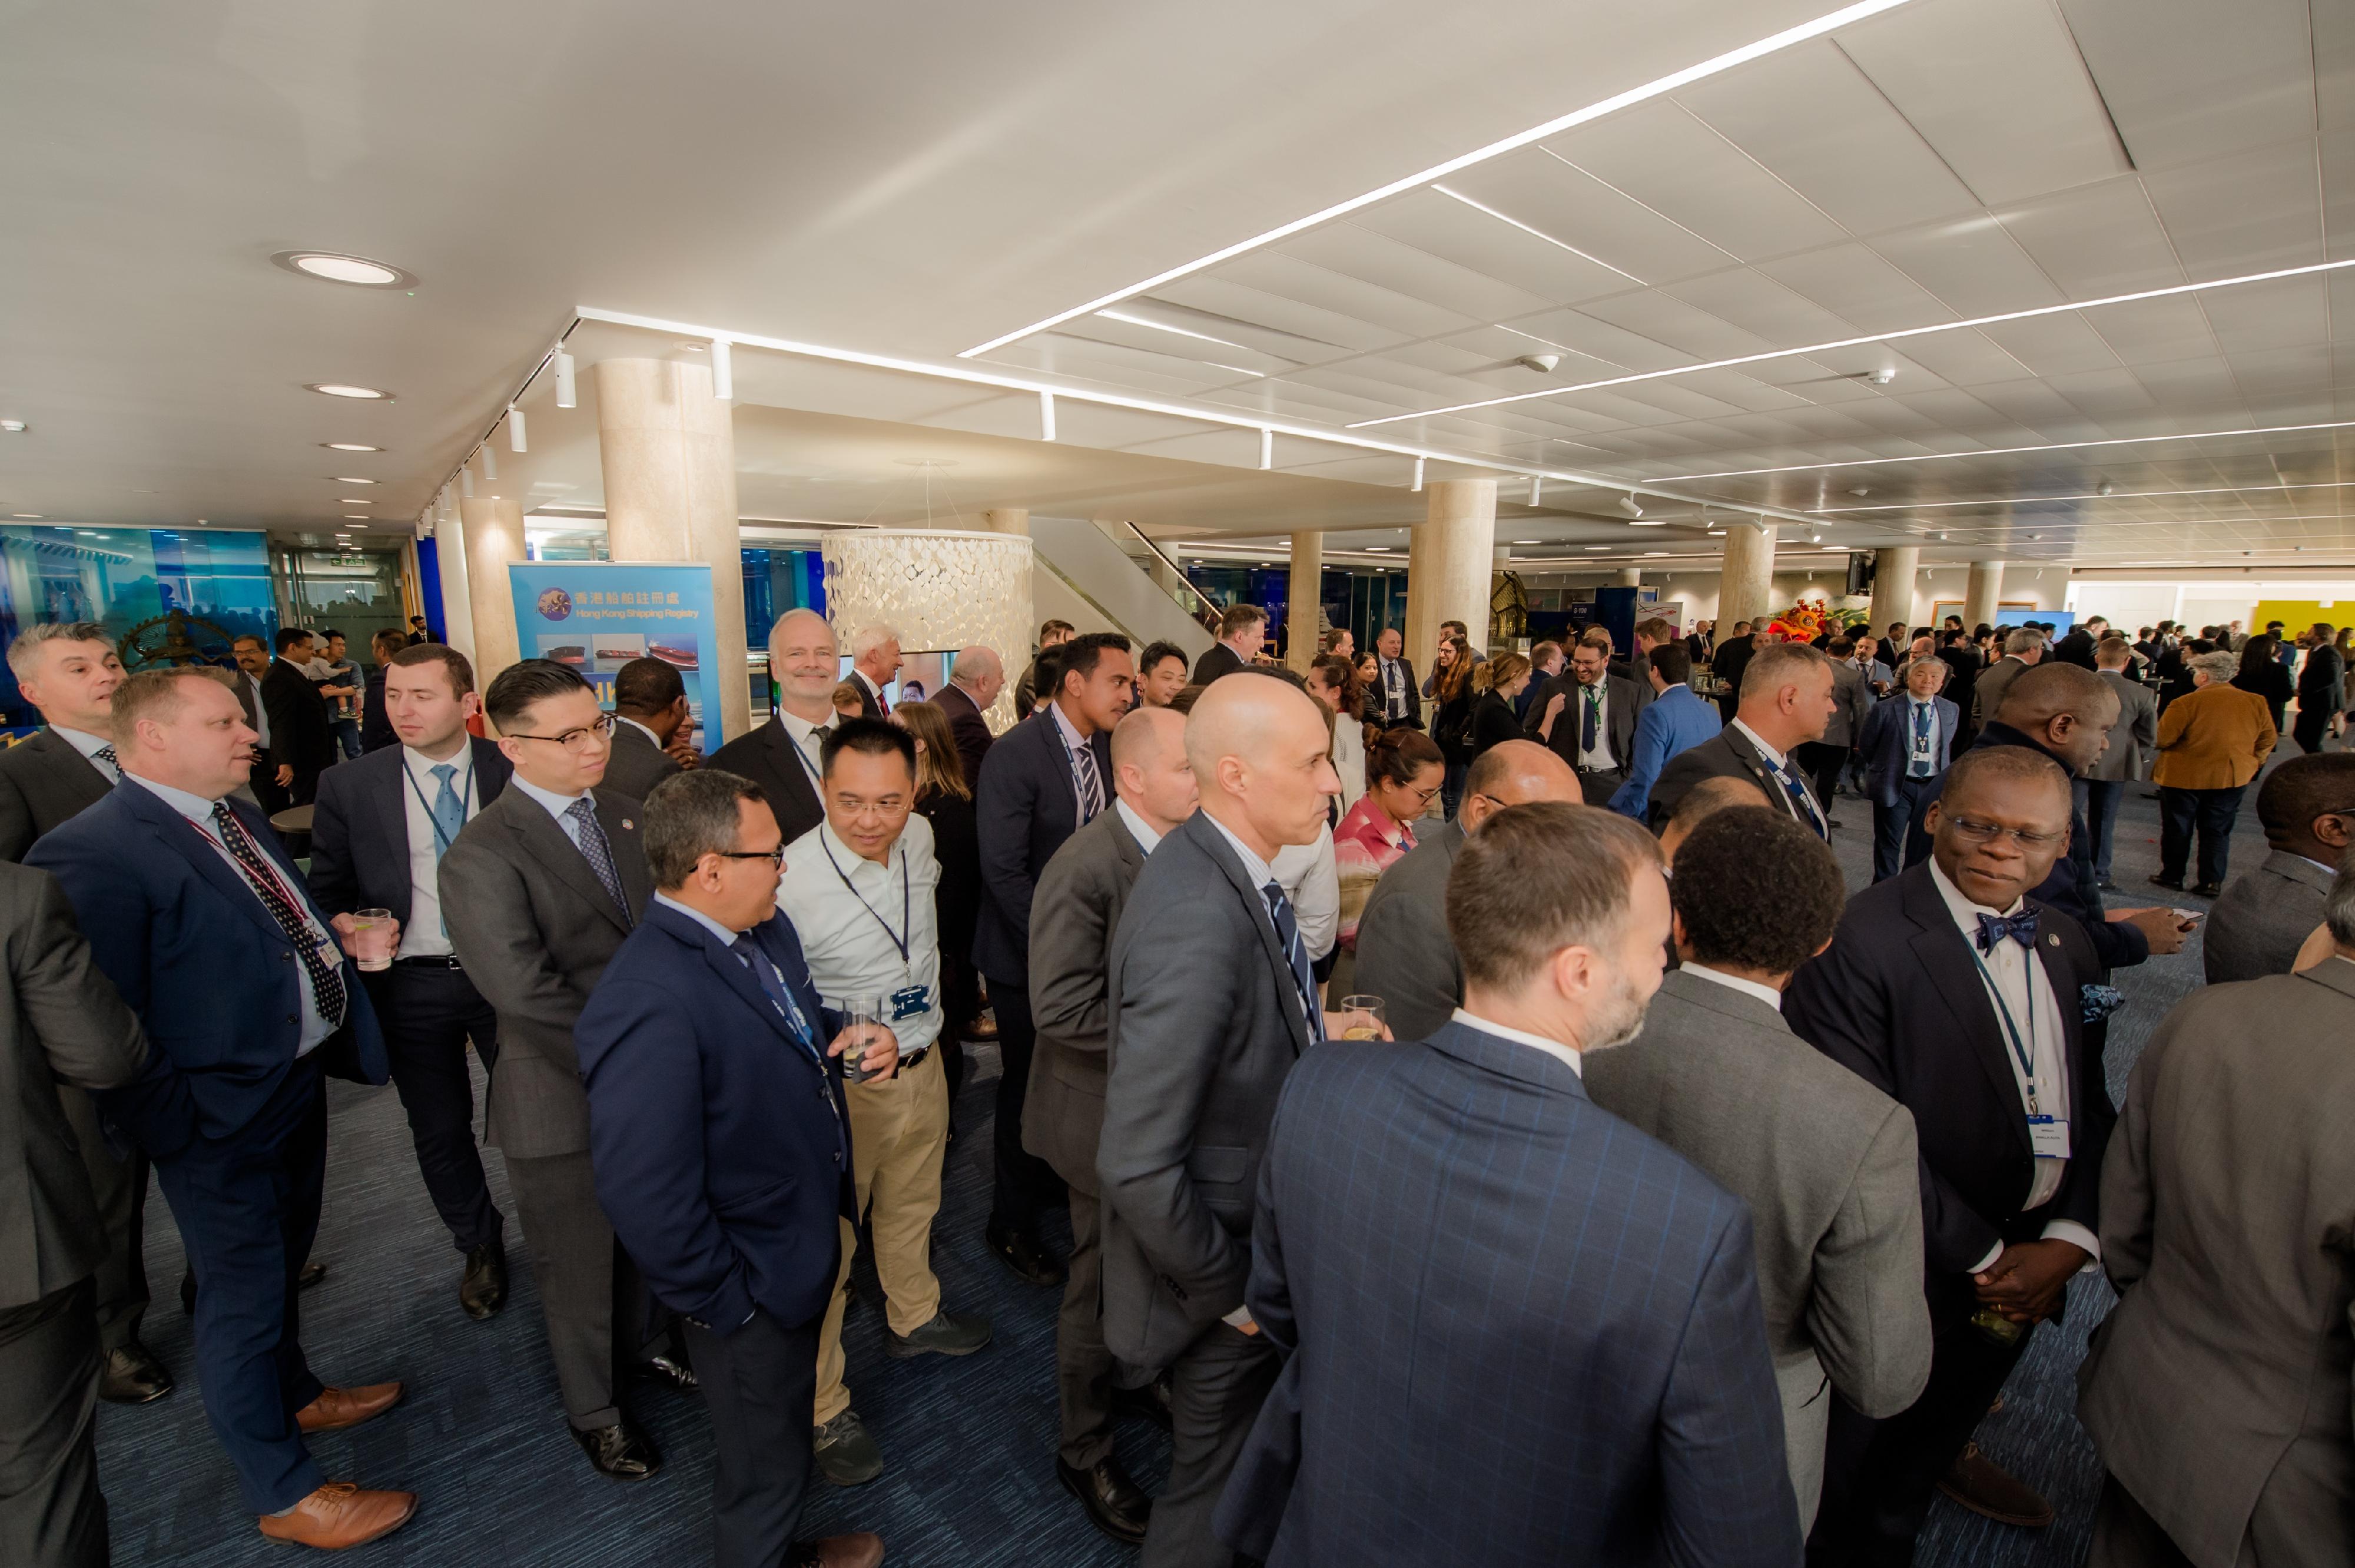 The Hong Kong Economic and Trade Office, London, with the support of the Marine Department, held the Taste of Hong Kong reception at the International Maritime Organization (IMO) on May 23 (London time). The reception was attended by about 300 guests from delegations of IMO Member States, top representatives of international organisations, and key representatives of shipowners in London.